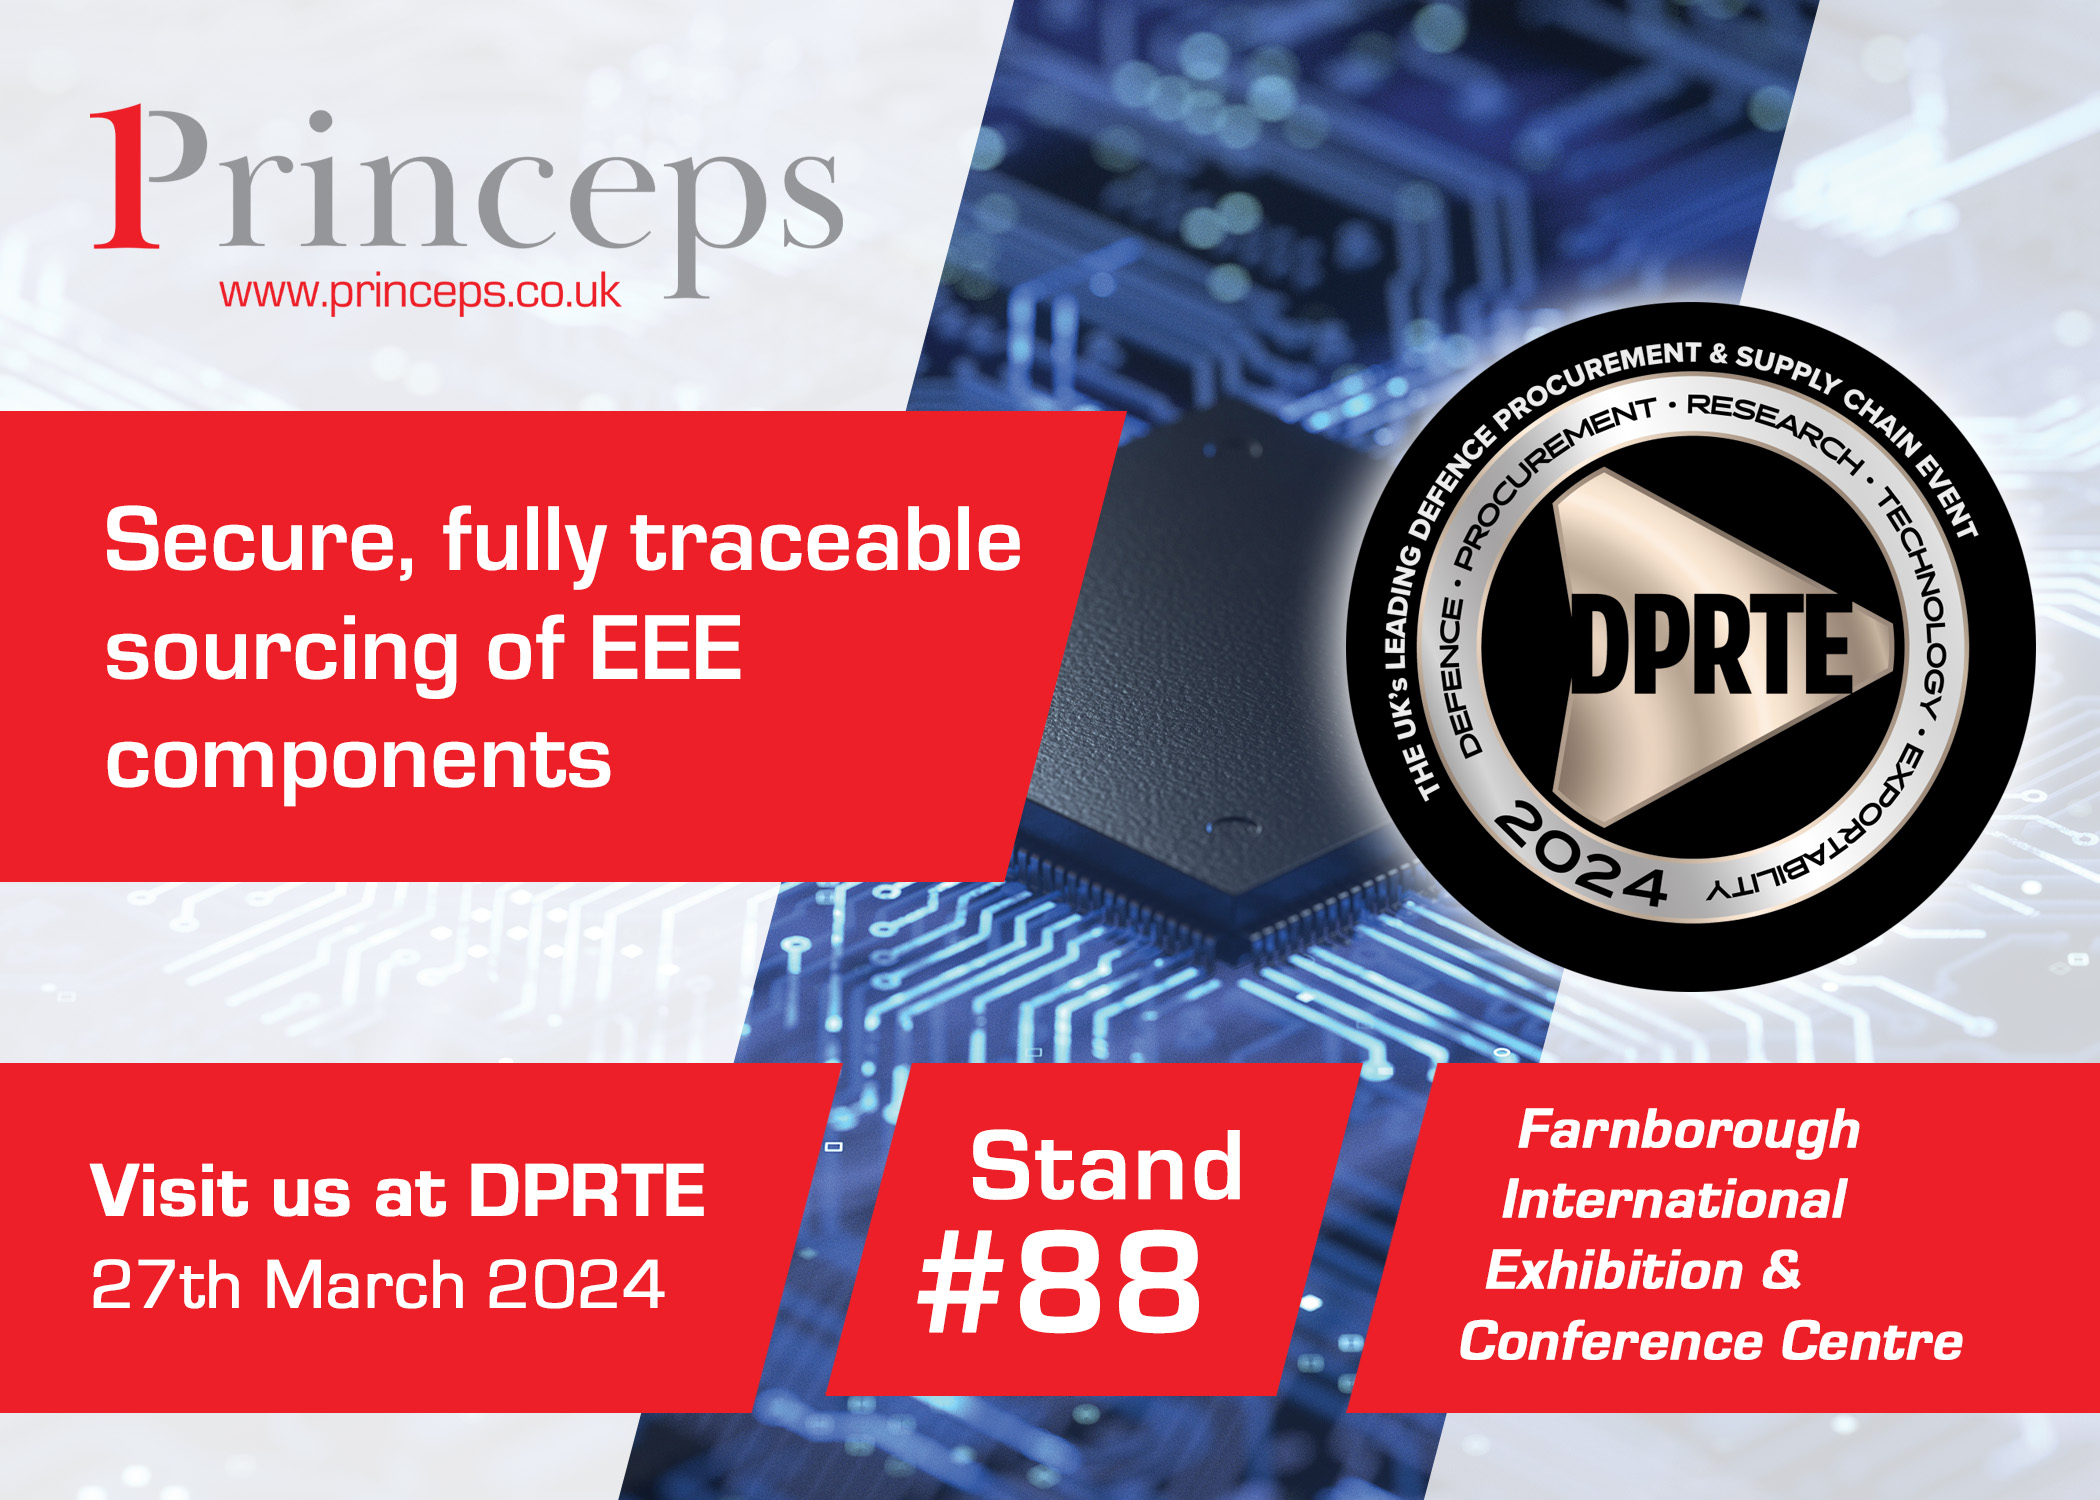 Princeps to showcase its value-added sourcing, procurement & supply chain services at DPRTE 2024